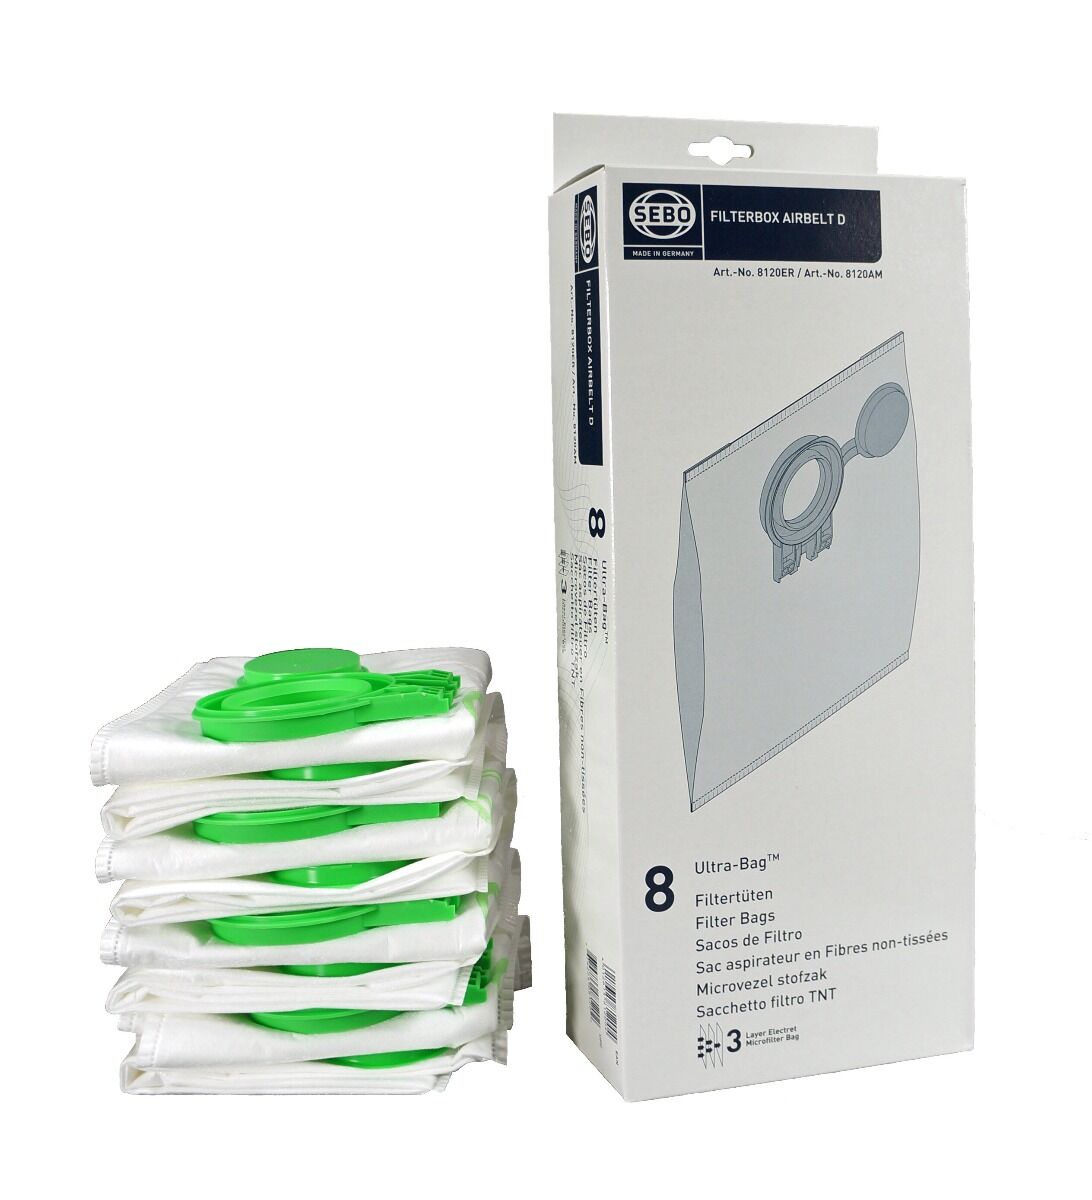 SEBO Filter Bags for AIRBELT D Series (8 3-Layer Bags with Caps)